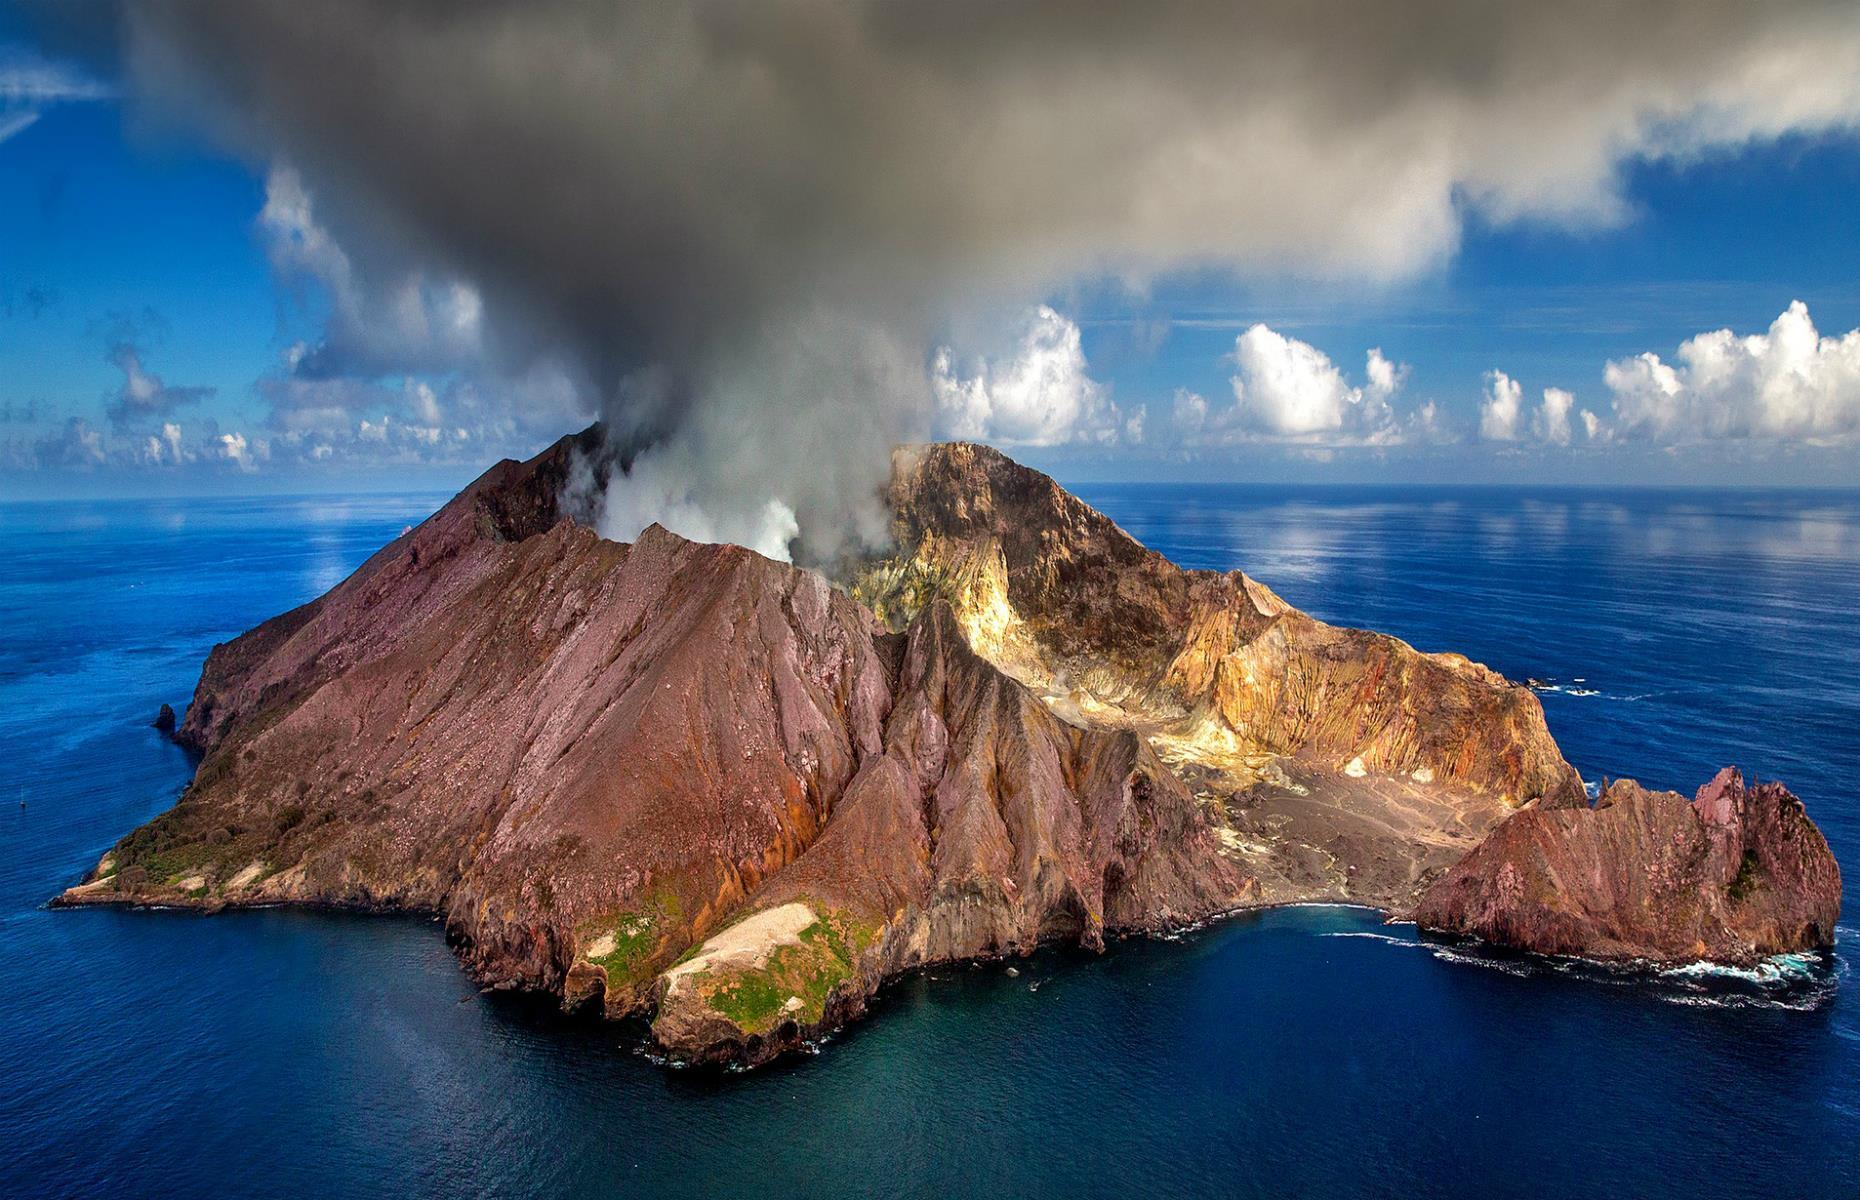 <p>In northern New Zealand’s Bay of Plenty, White Island – or Whakaari in Māori – is an active marine volcano that last erupted in December 2019. There were 47 people on the island at the time and 22 tragically lost their lives when rock and ash was exploded into the air. Visitors can no longer set foot on White Island, but you can take a scenic flight from Whakatane, Rotorua, Tauranga or Taupo to see the often-smoking crater up close.</p>  <p><strong><a href="https://www.loveexploring.com/galleries/73178/the-worlds-most-incredible-active-volcanoes-you-can-visit?page=1">More active volcanoes you can visit</a></strong></p>